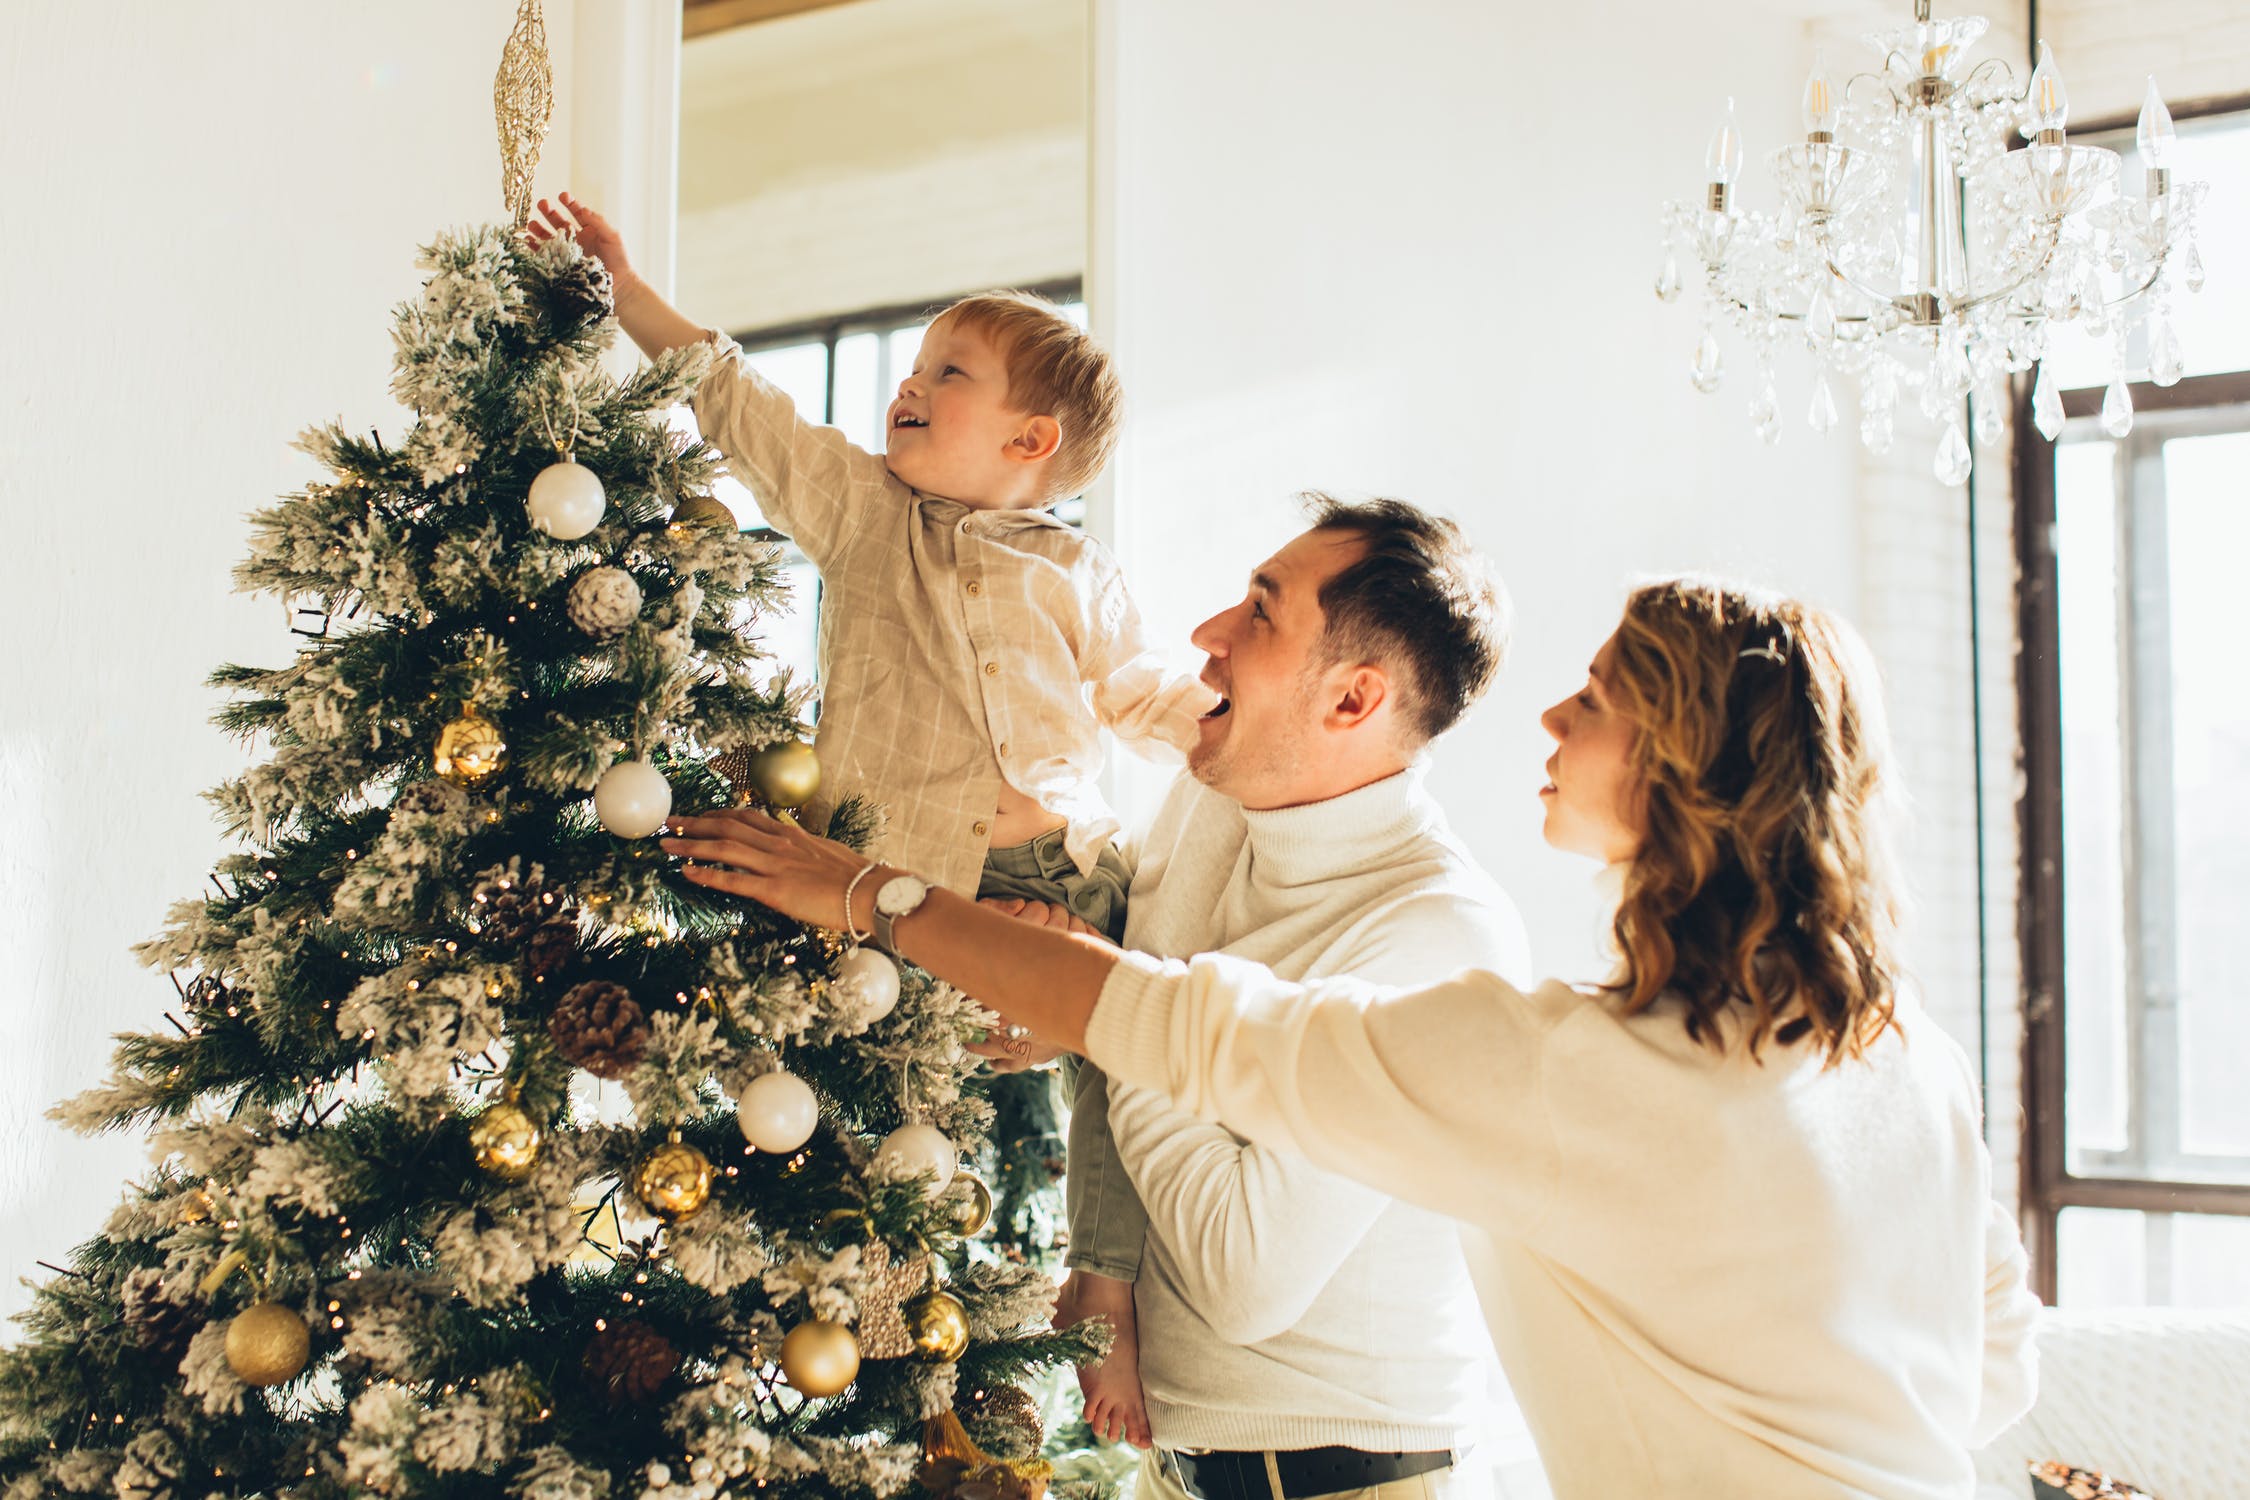 Wanda saw her son decorating the Christmas tree | Source: Pexels